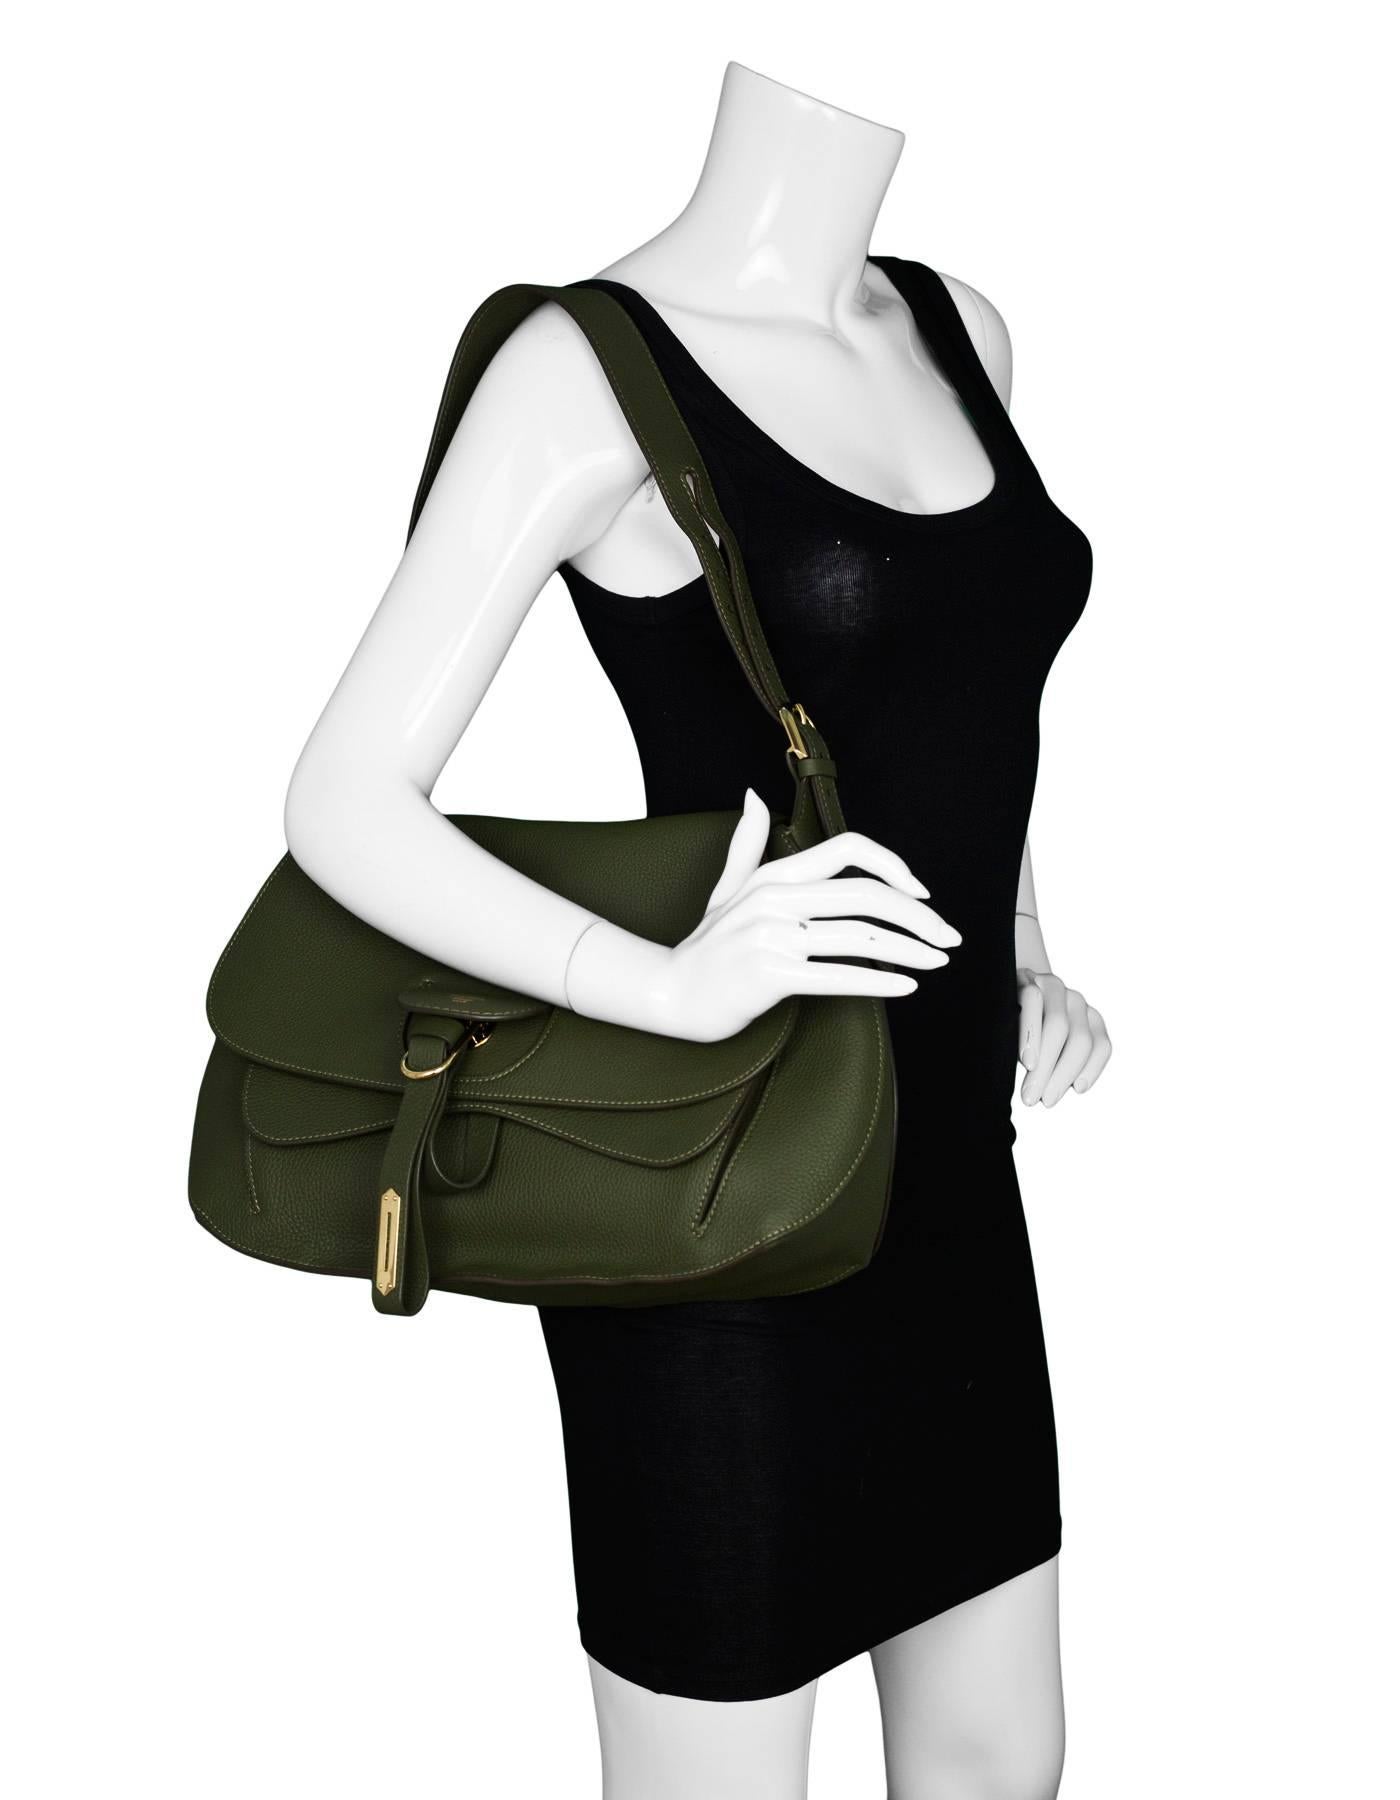 Fontana Milano 1915 Green Weight Medium Saddle Hobo

Made In: Italy
Color: Green
Hardware: Goldtone
Materials: Leather, metal
Lining: Tan leather
Closure/Opening: Flap top
Exterior Pockets: One pocket under flap, one pocket at back
Interior Pockets: